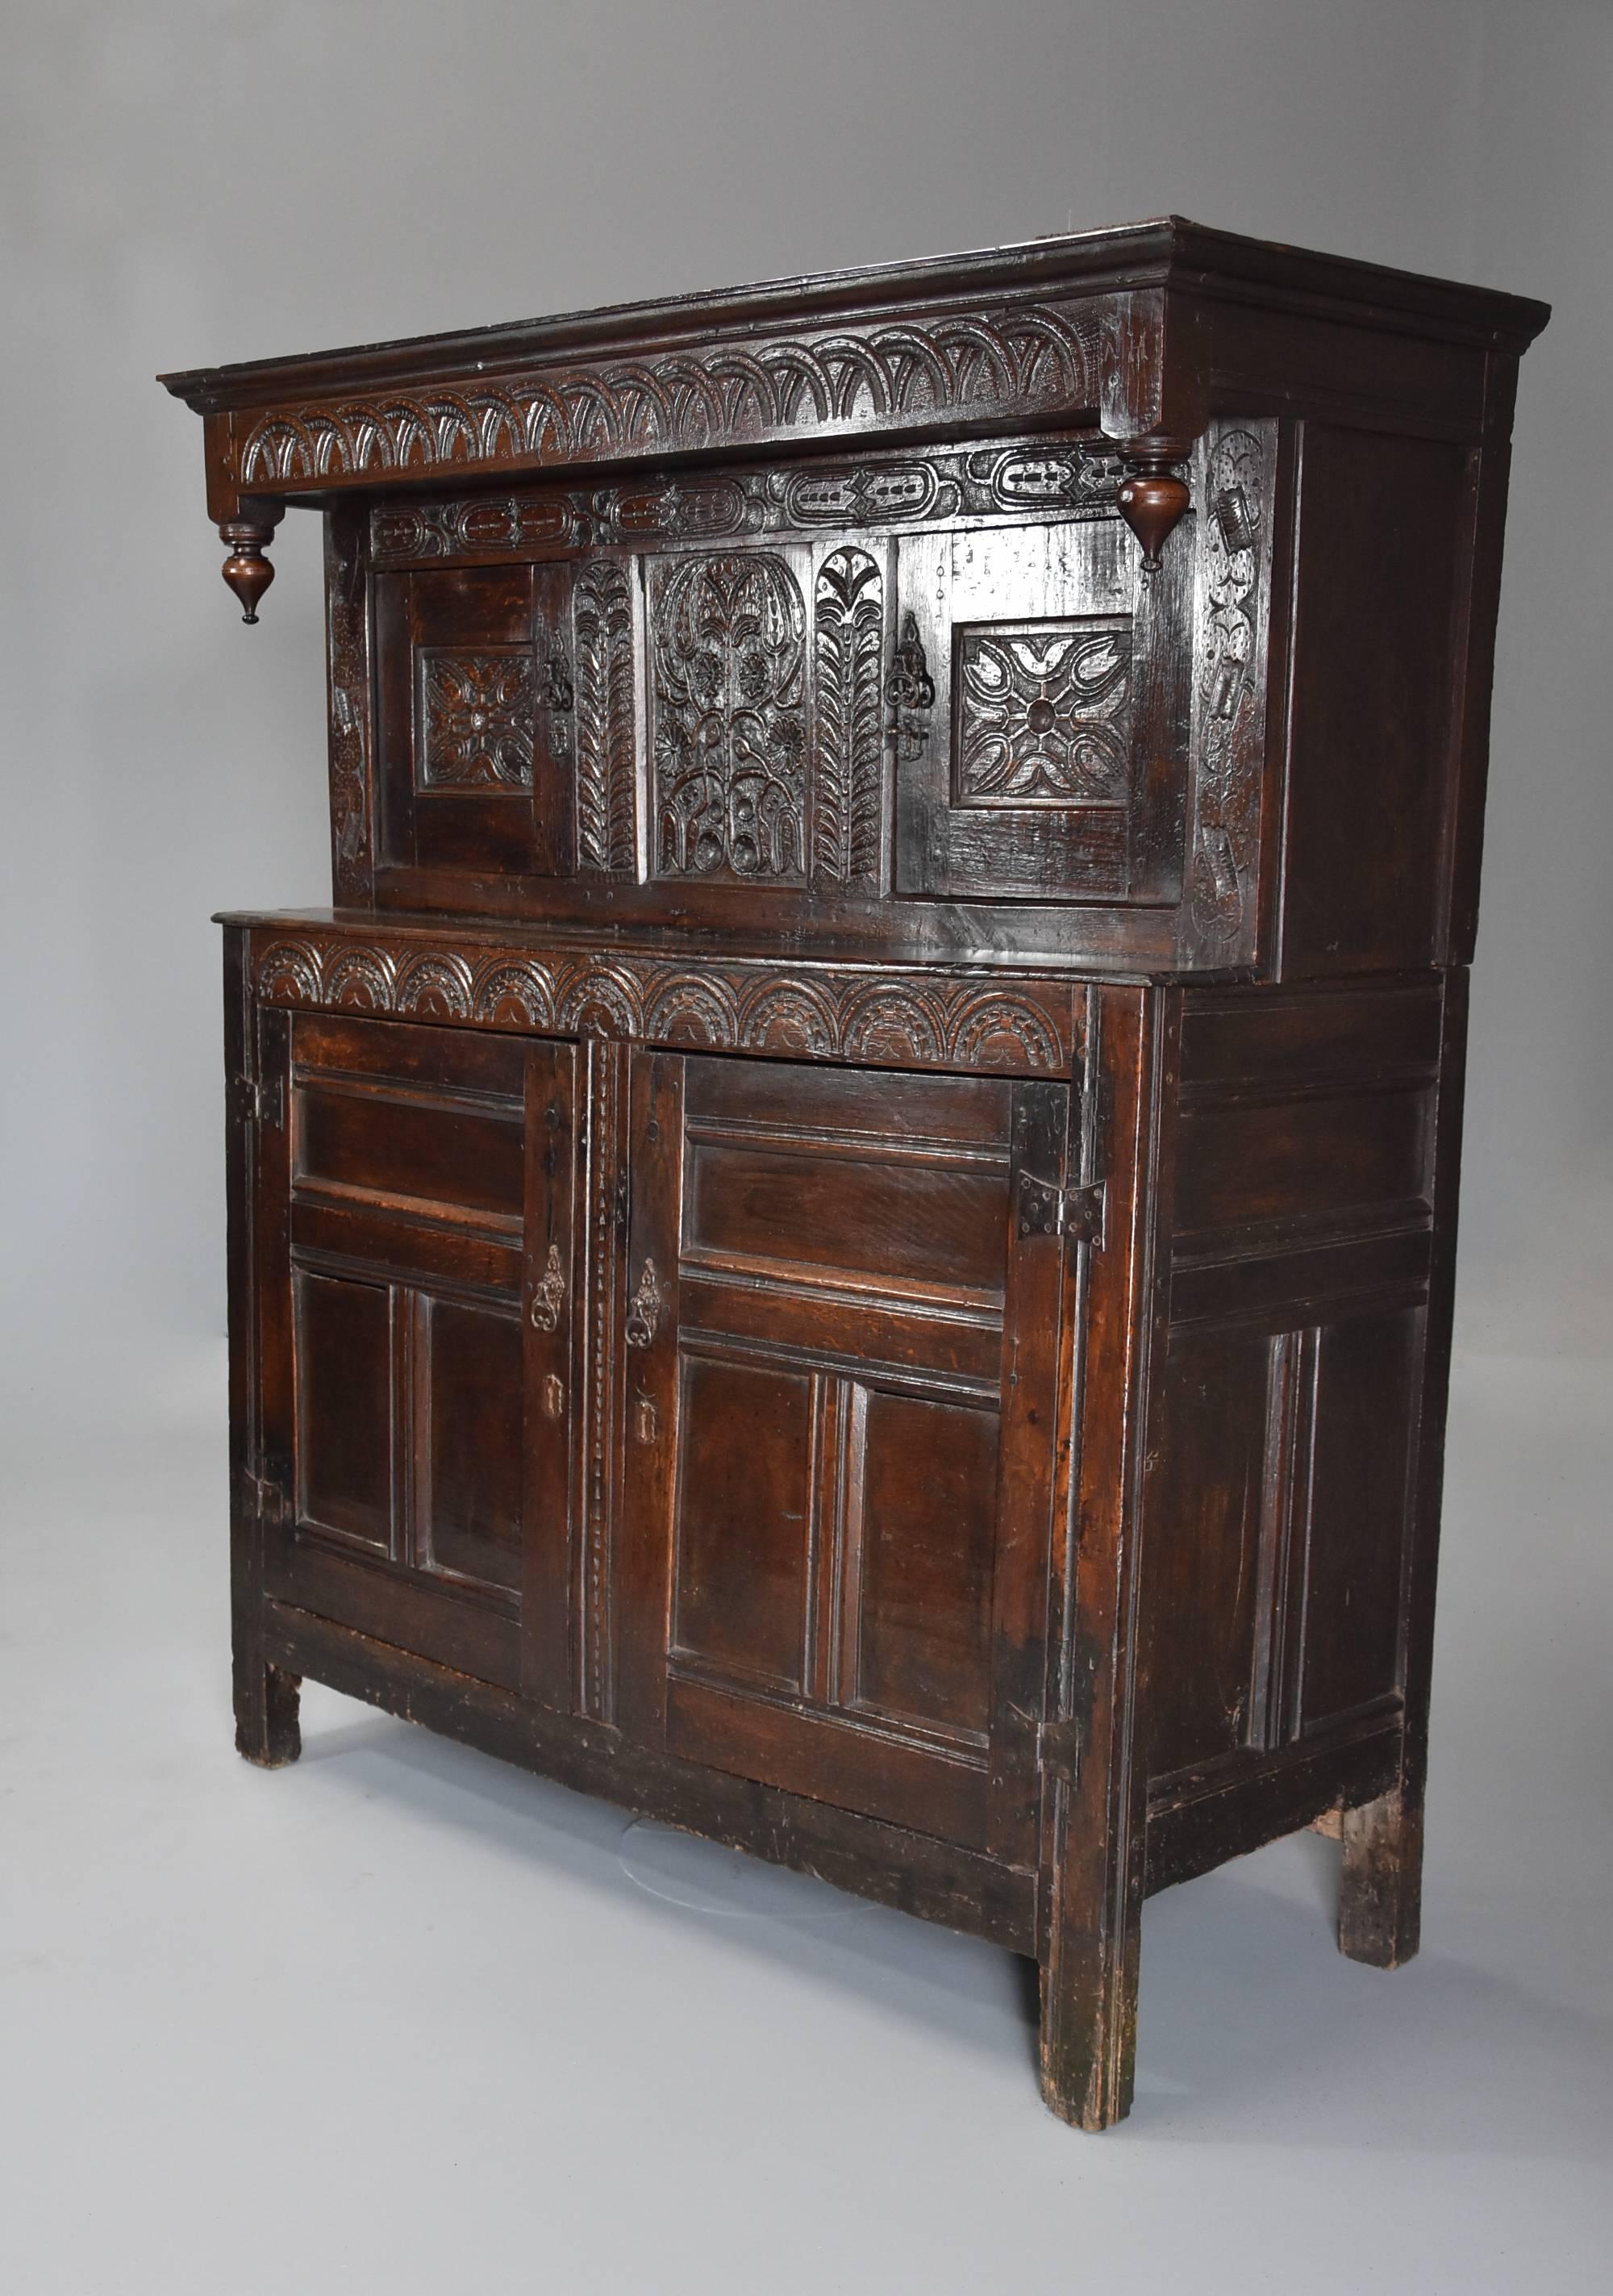 English Mid-17th Century Carved Oak Press Cupboard with Superb Original Patina For Sale